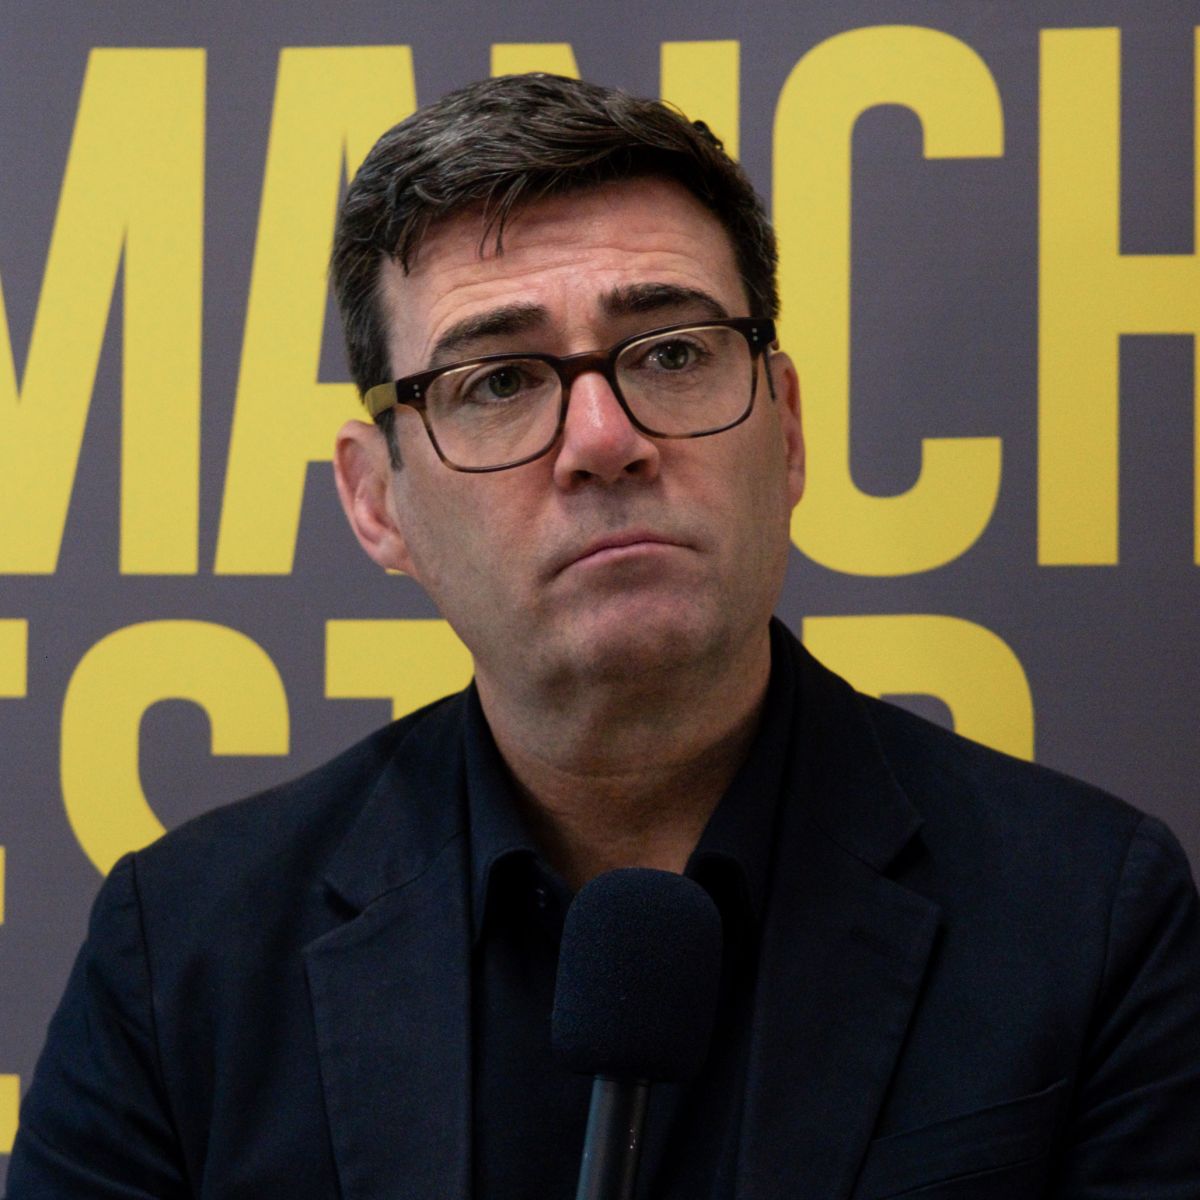 Exclusive: Andy Burnham confirms he’s seeking a third mayoral term